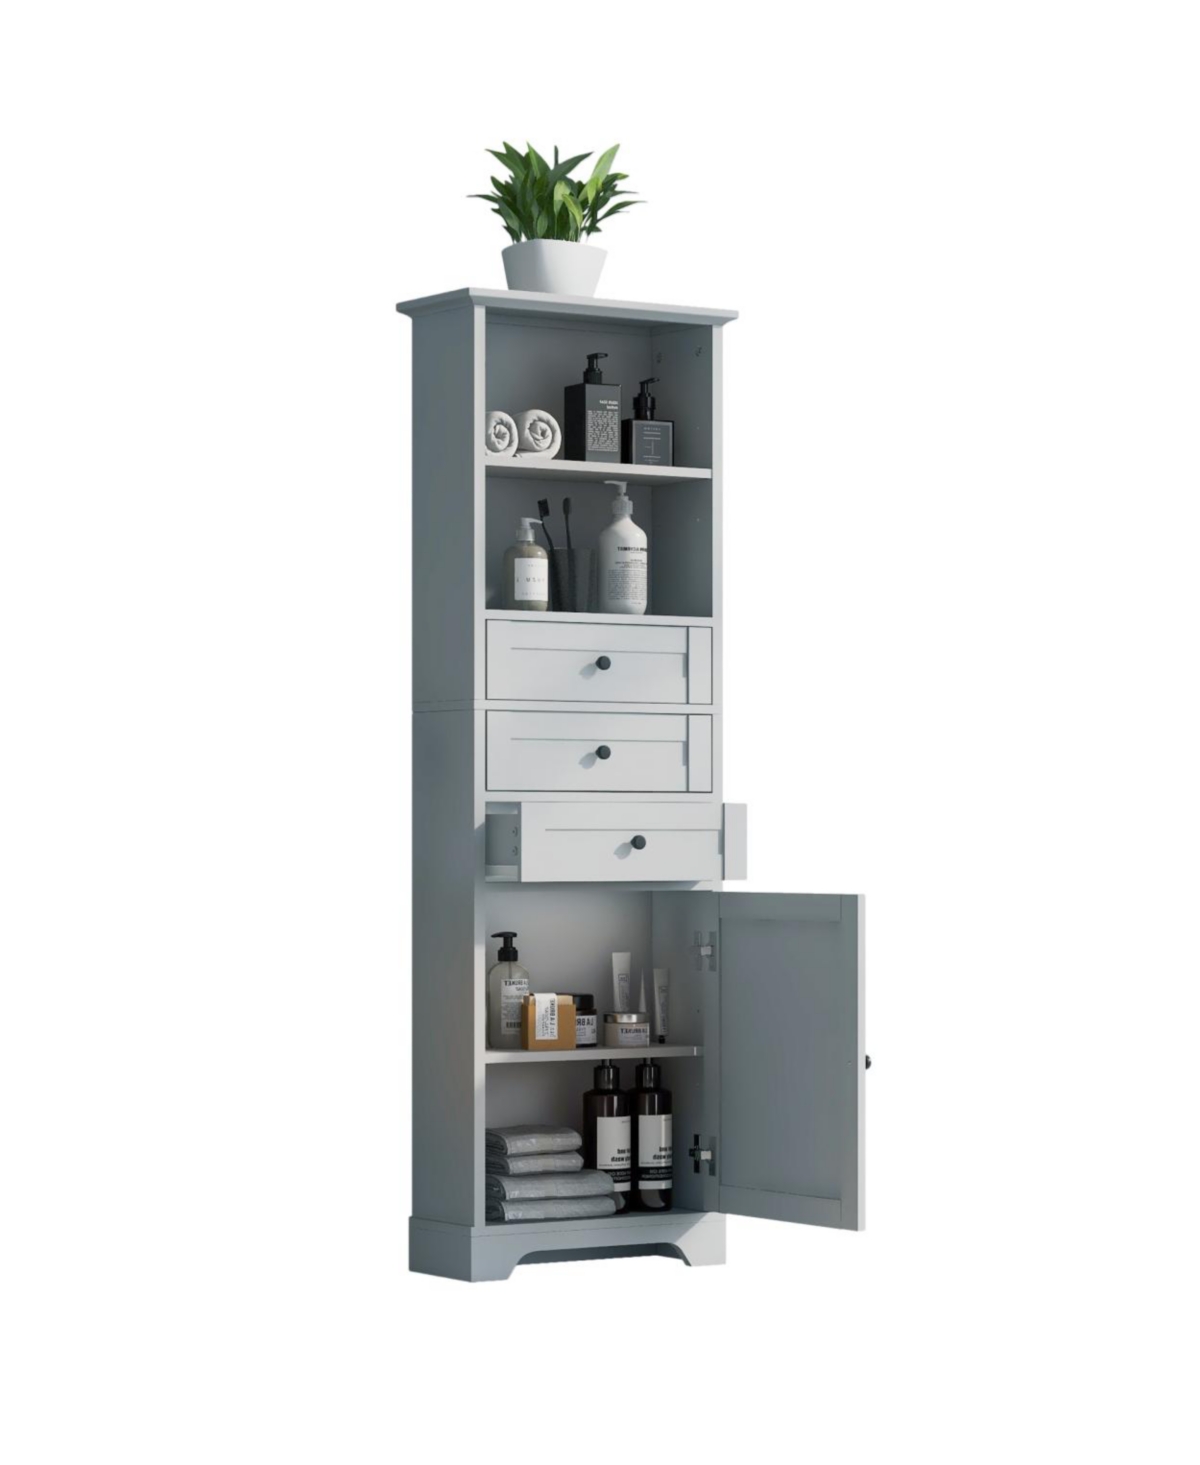 3-Drawer Tall Storage Cabinet for Bathroom, Kitchen, and Living Room - Grey